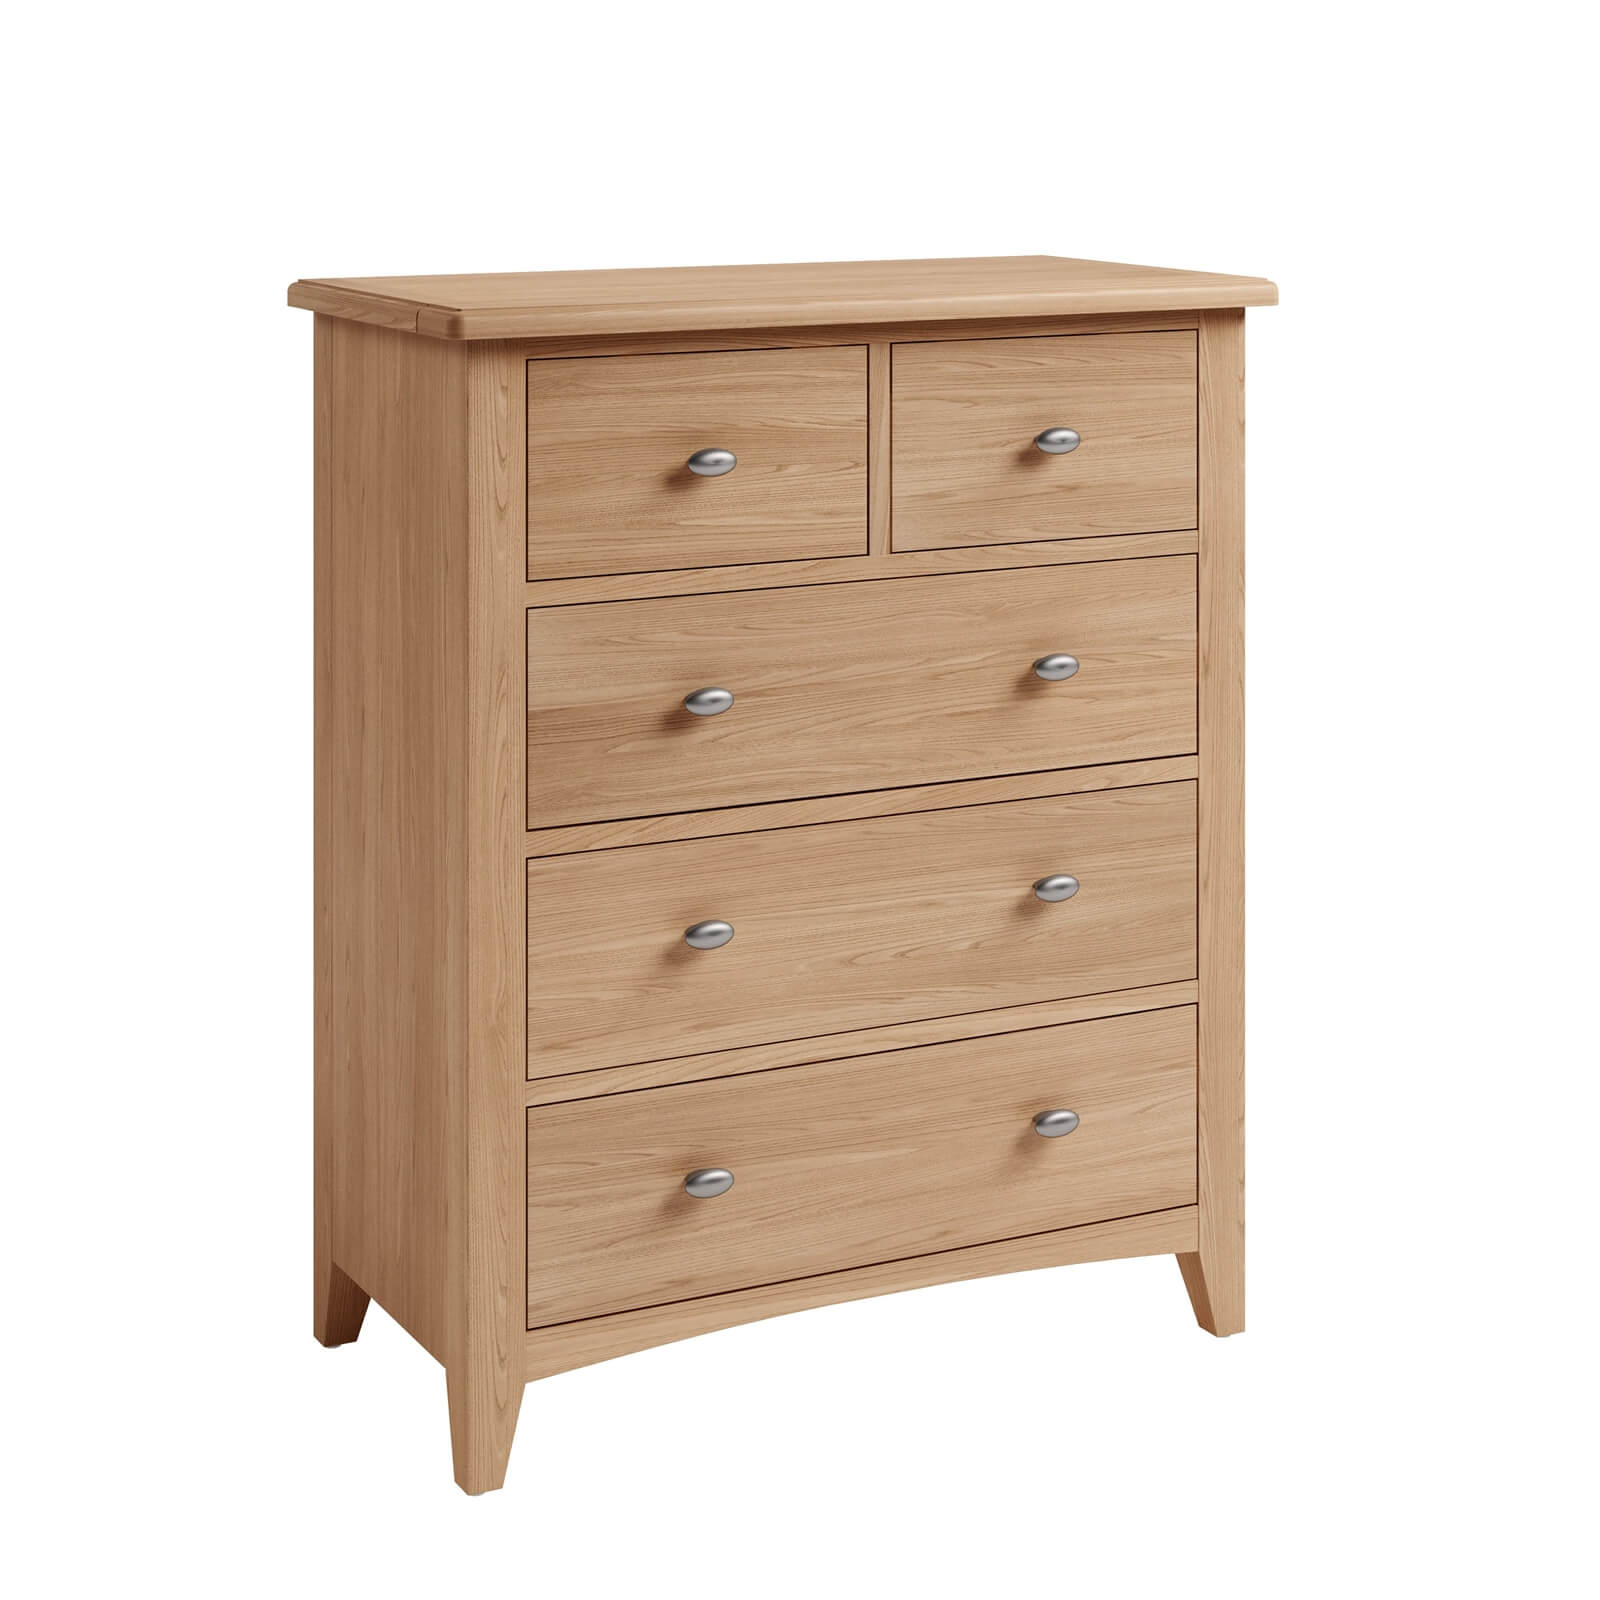 Kea 2 Over 3 Chest of Drawers - Oak